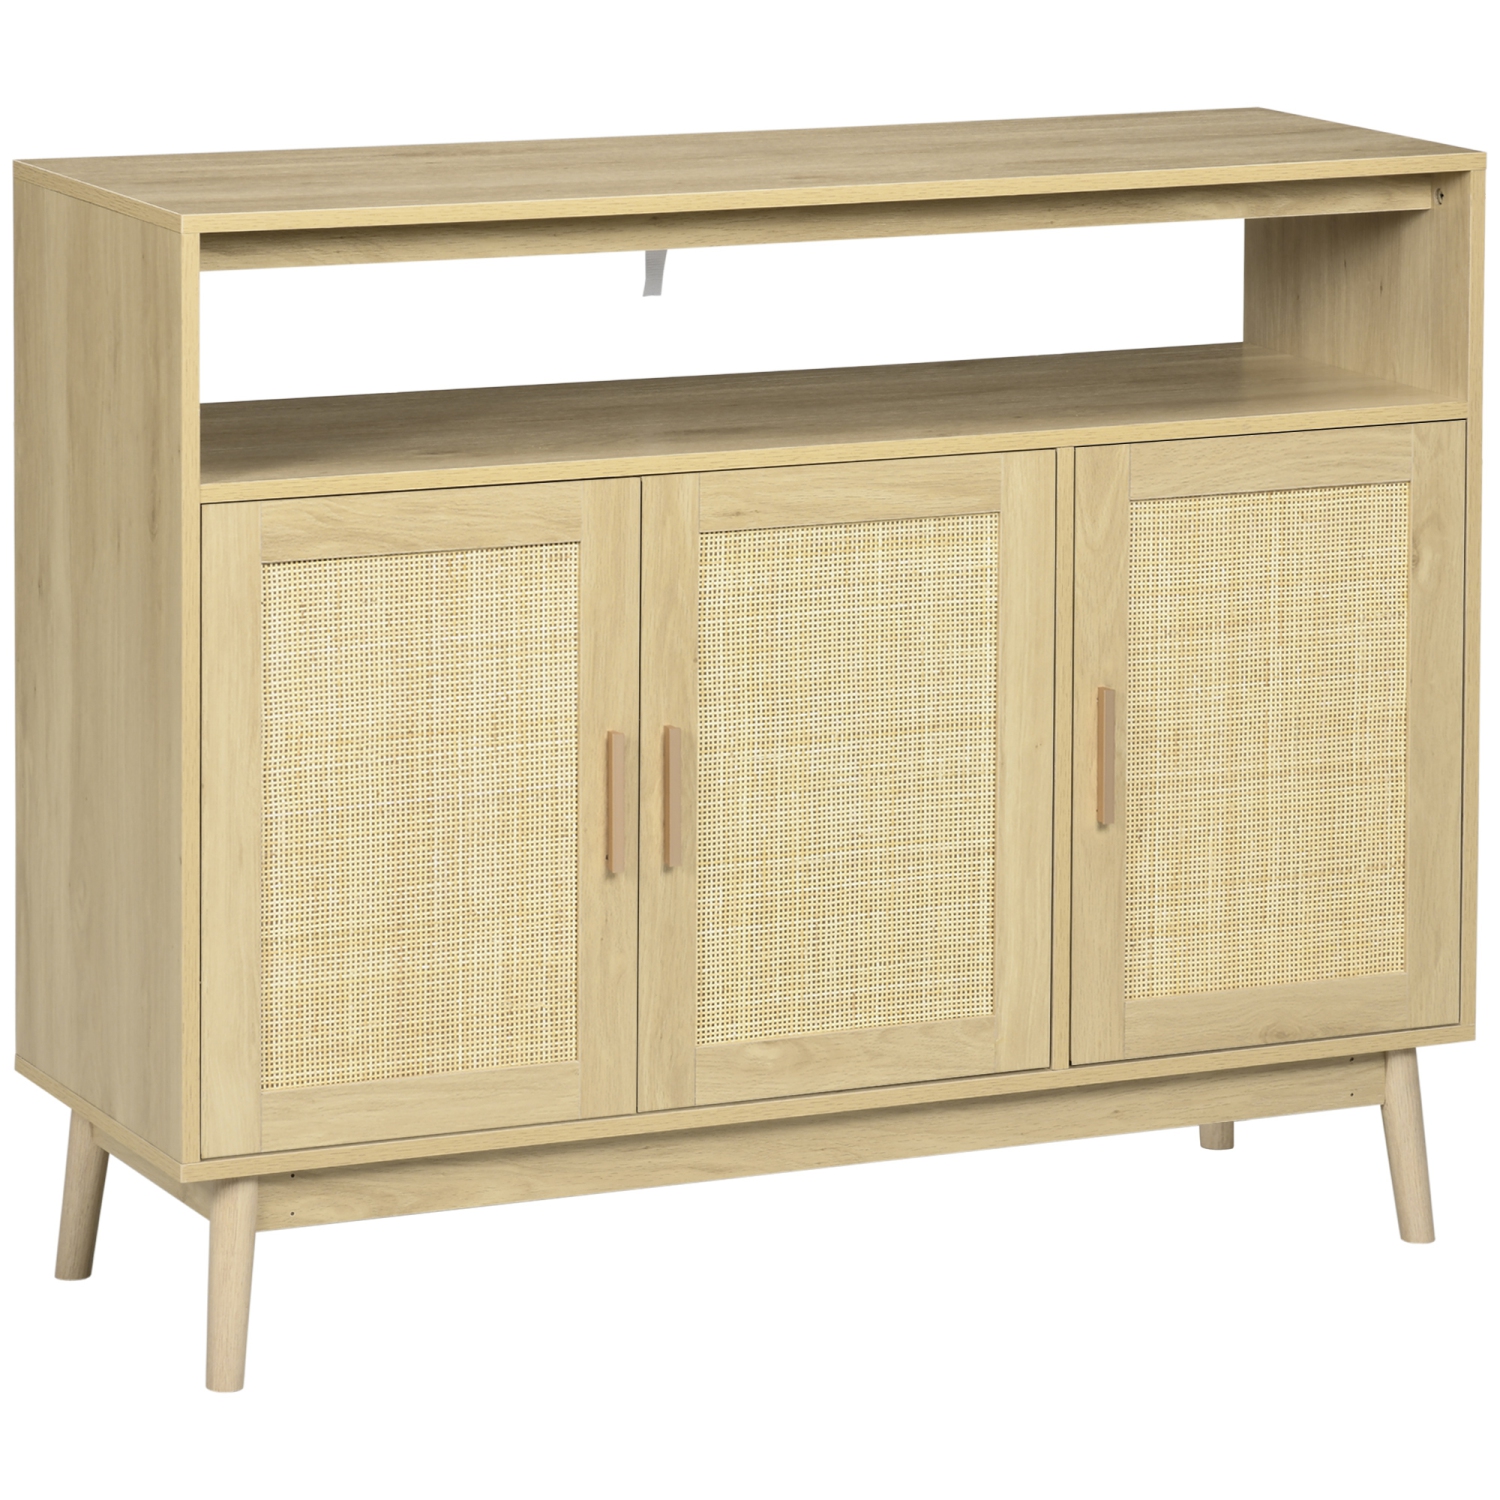 HOMCOM Buffet Cabinet, Accent Storage Cabinet, Boho Style Sideboard with 3 Rattan Doors, Adjustable Interior Shelves, Wood Legs, Nature Wood